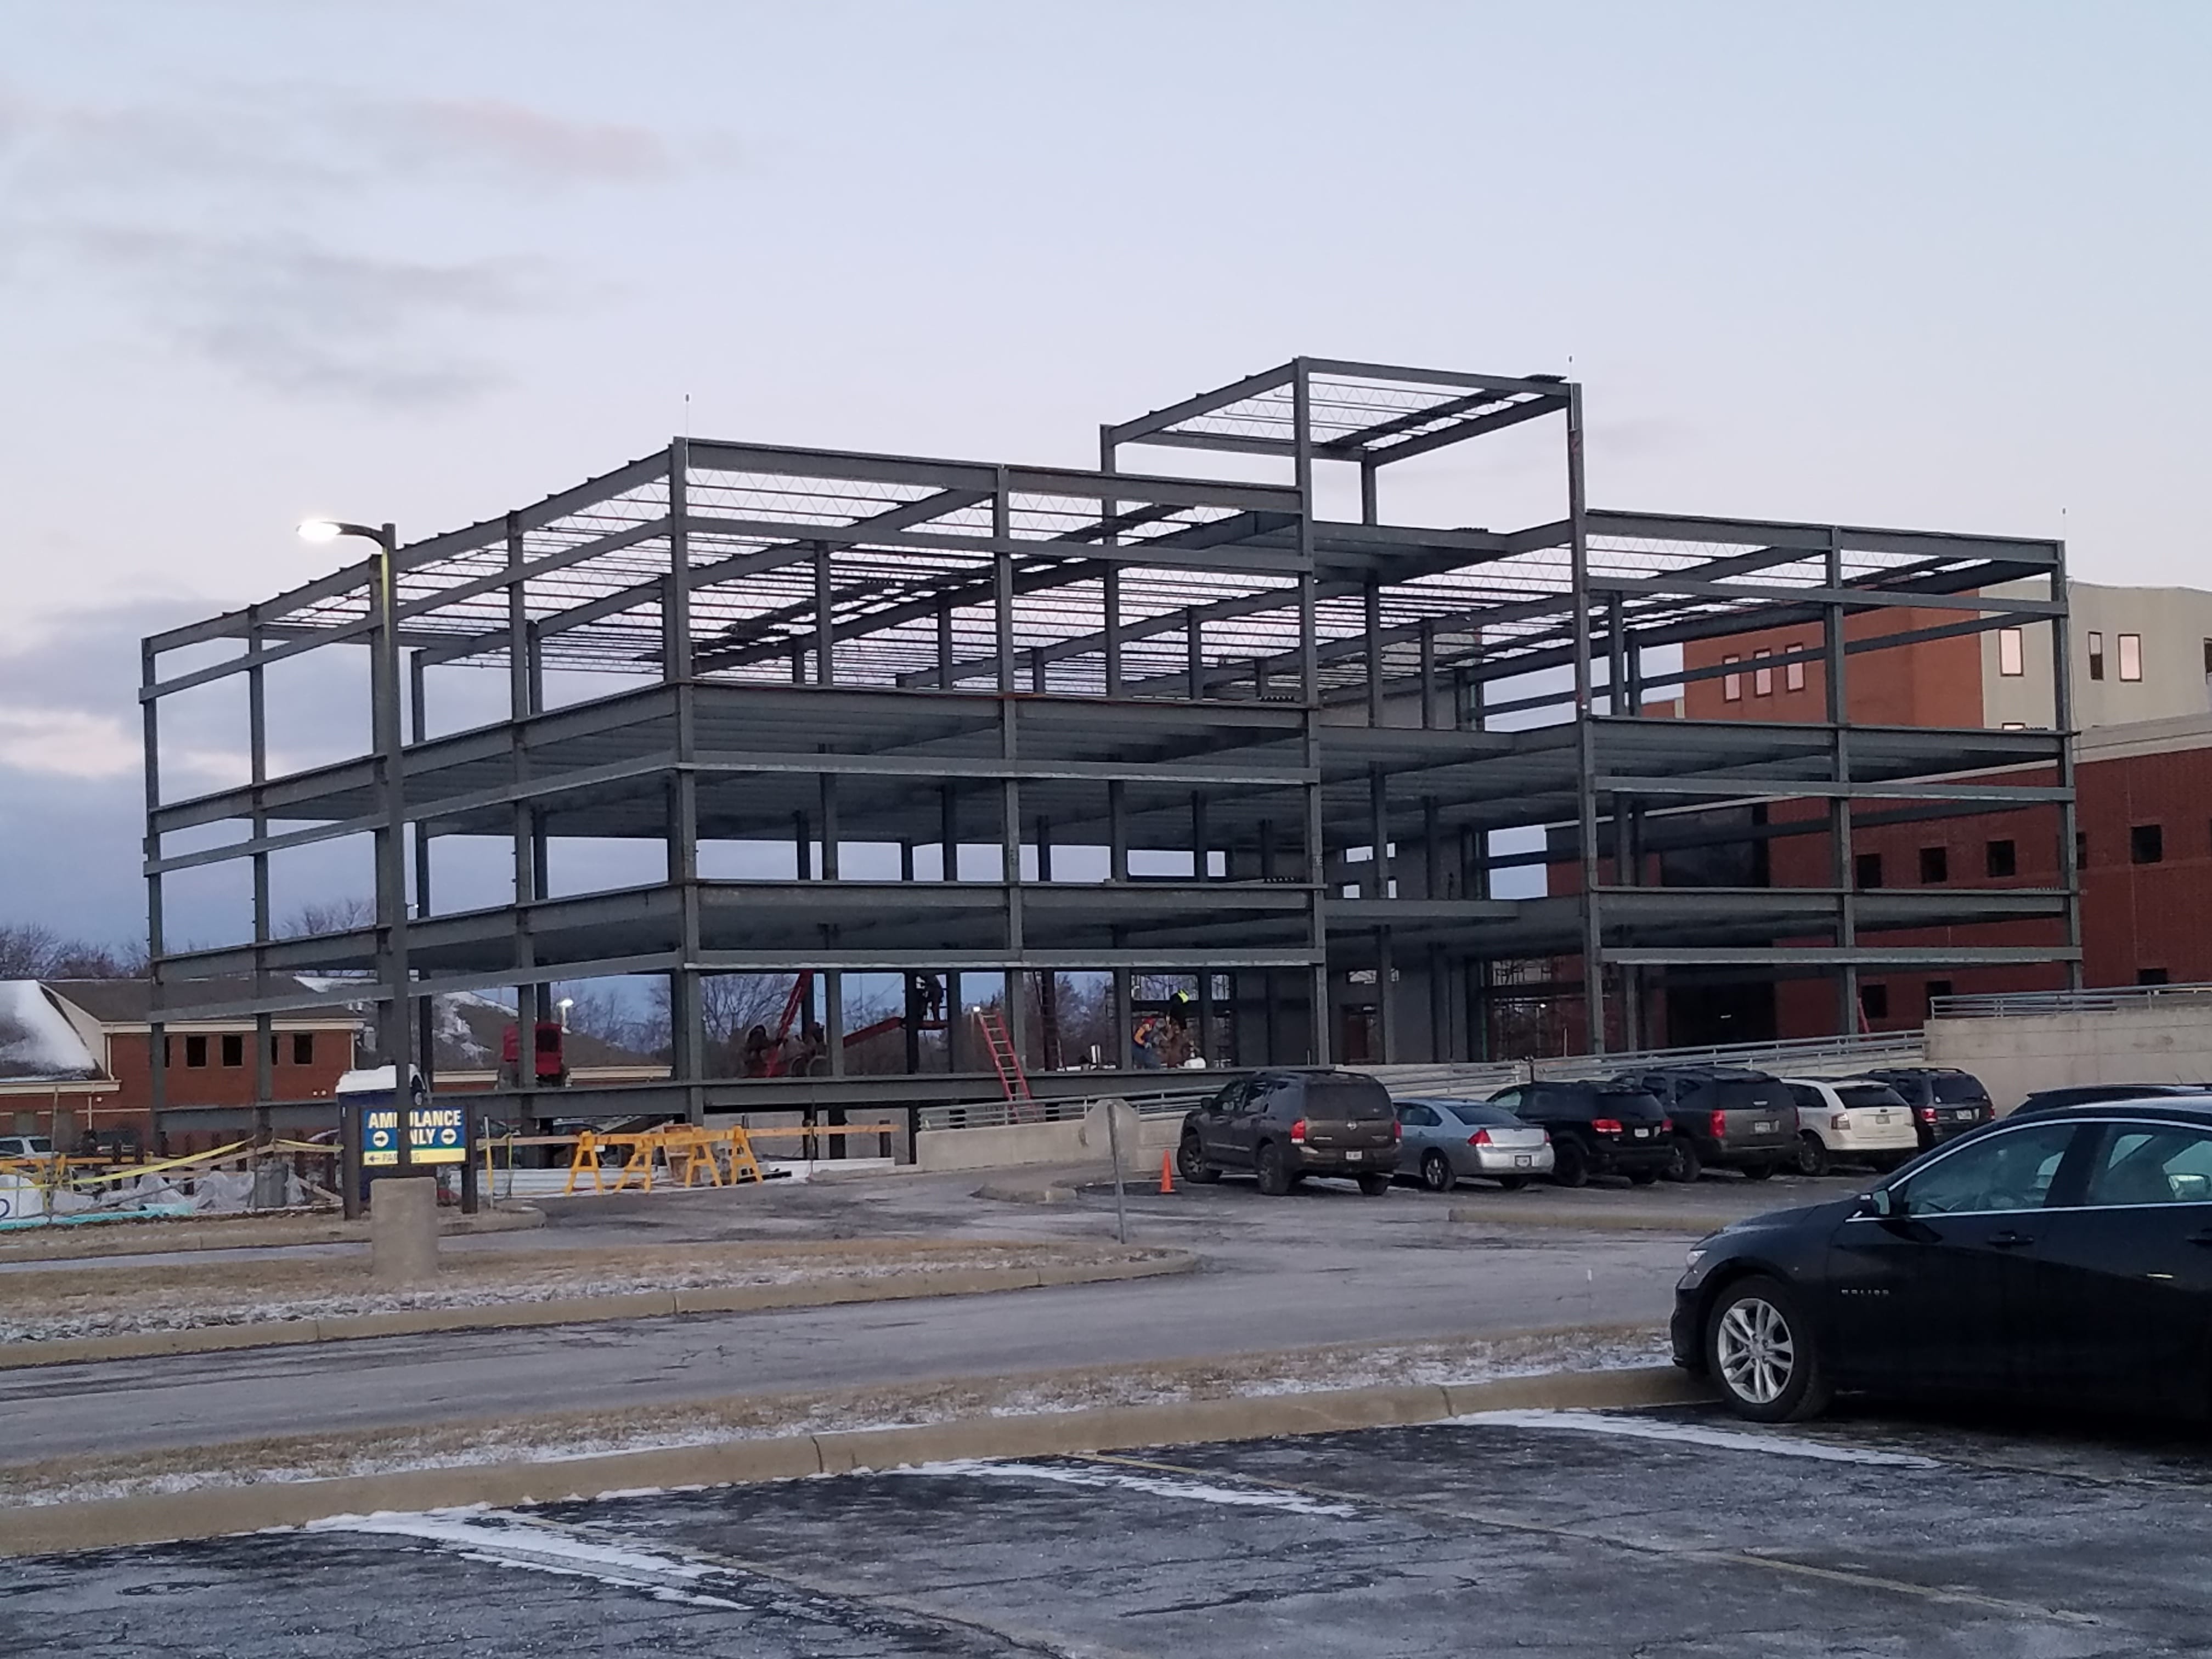 Structural Steel fabricators created this Frame Work for Swanton's Fulton County Hospital Project